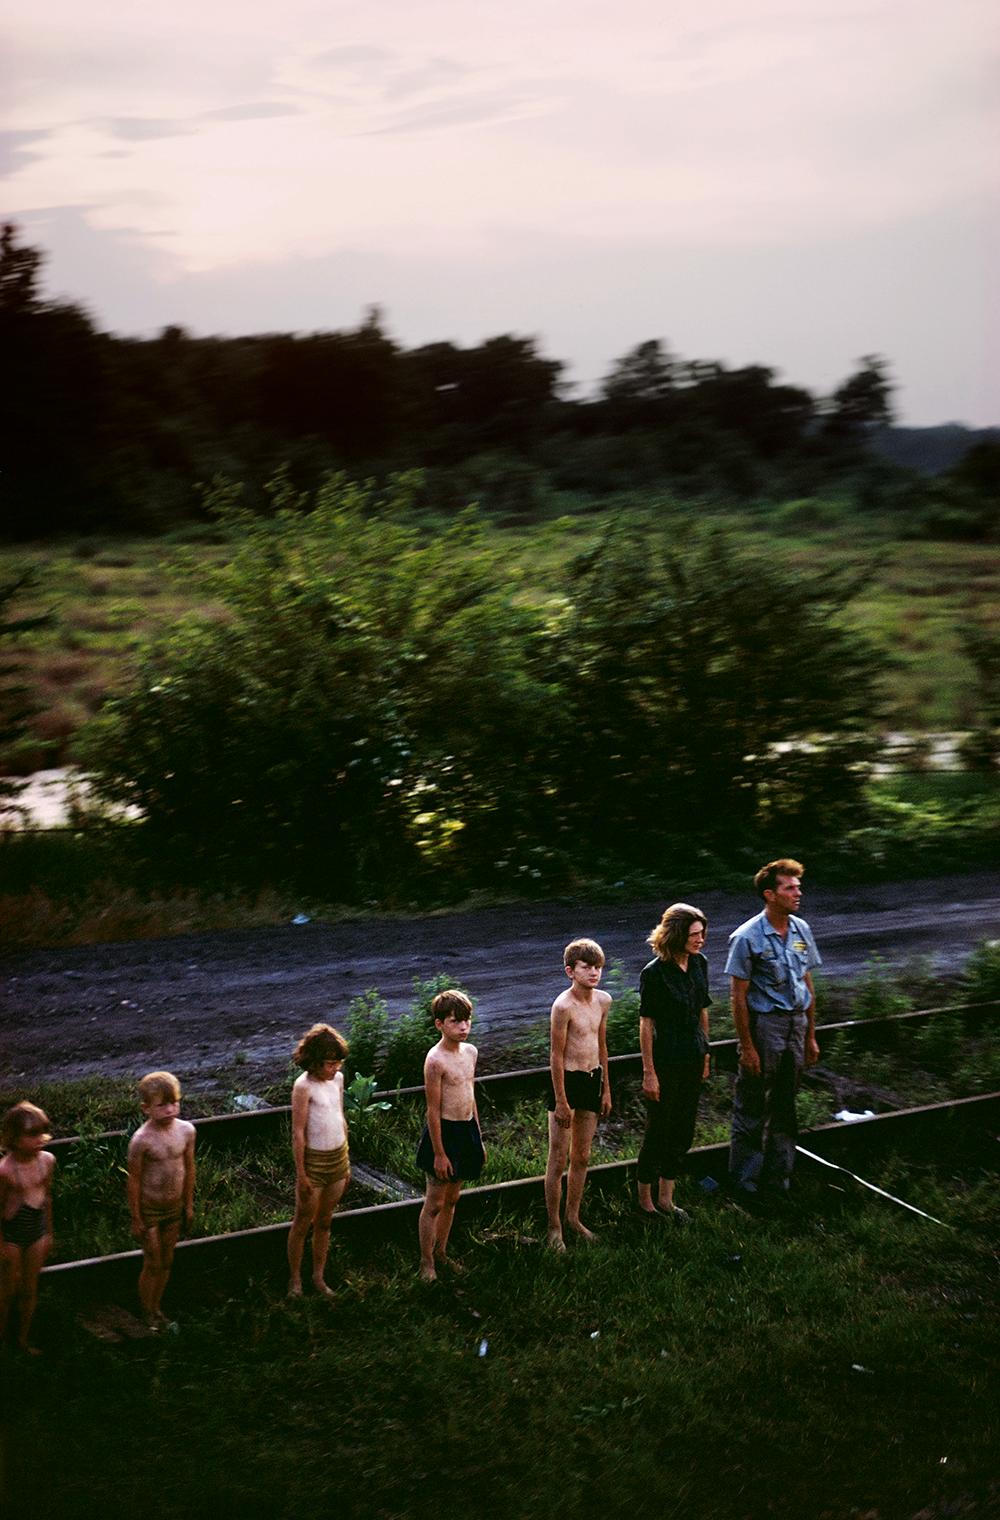 Paul Fusco Color Photograph - Untitled from The RFK Funeral Train